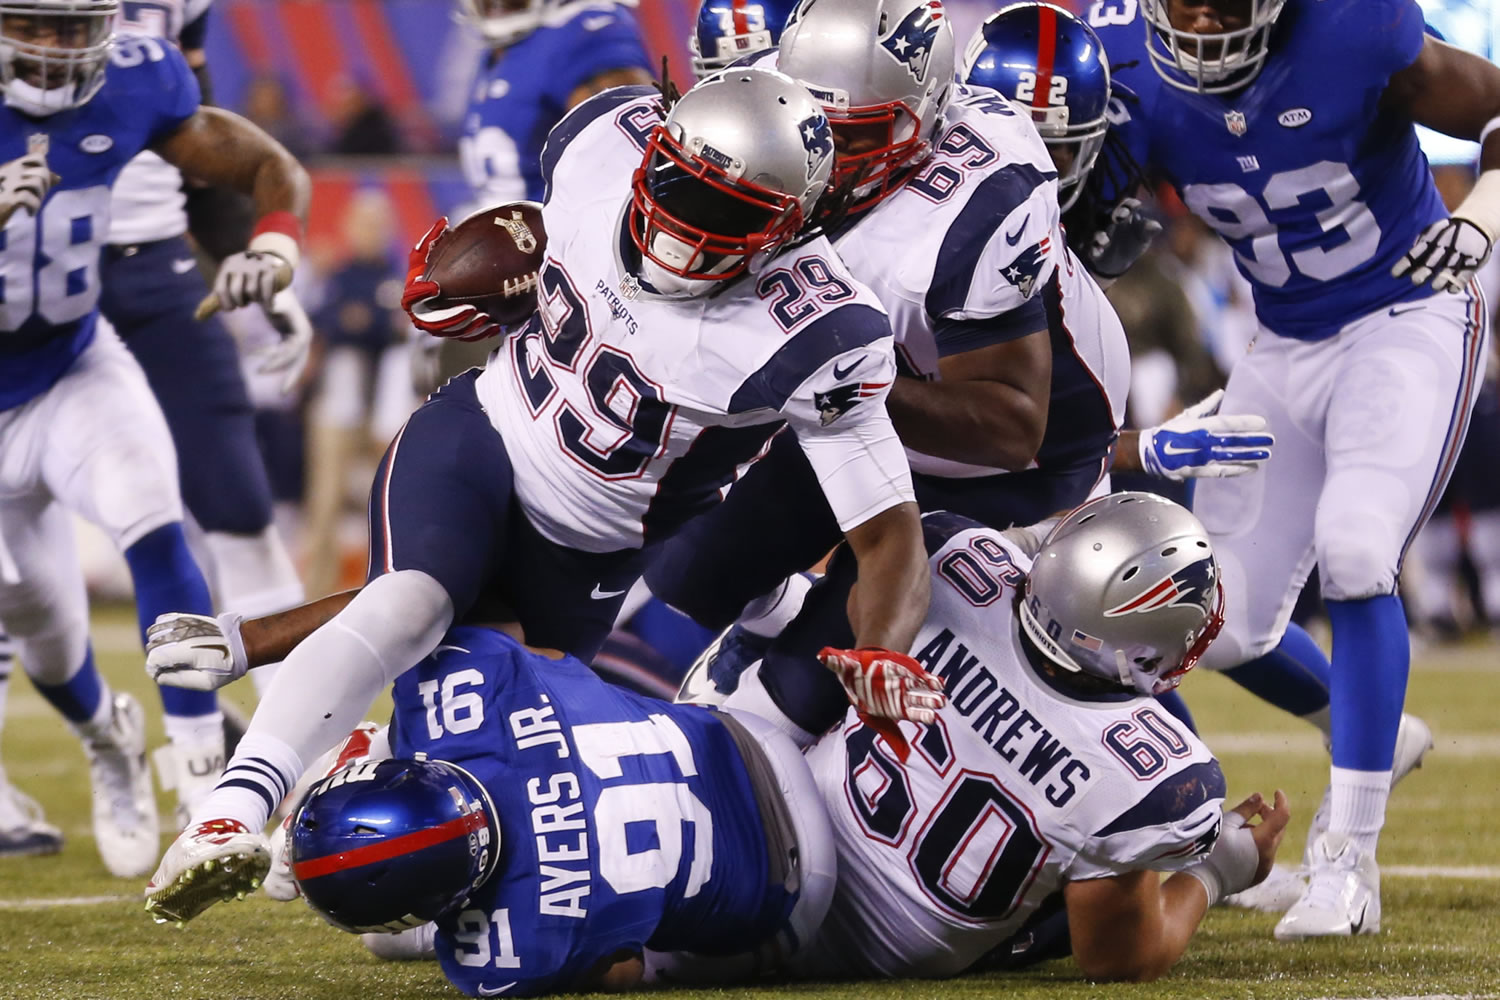 New England Patriots' LeGarrette Blount (29) rushes past New York Giants' Robert Ayers (91) during the second half of an NFL football game Sunday Nov. 15, 2015, in East Rutherford, N.J.